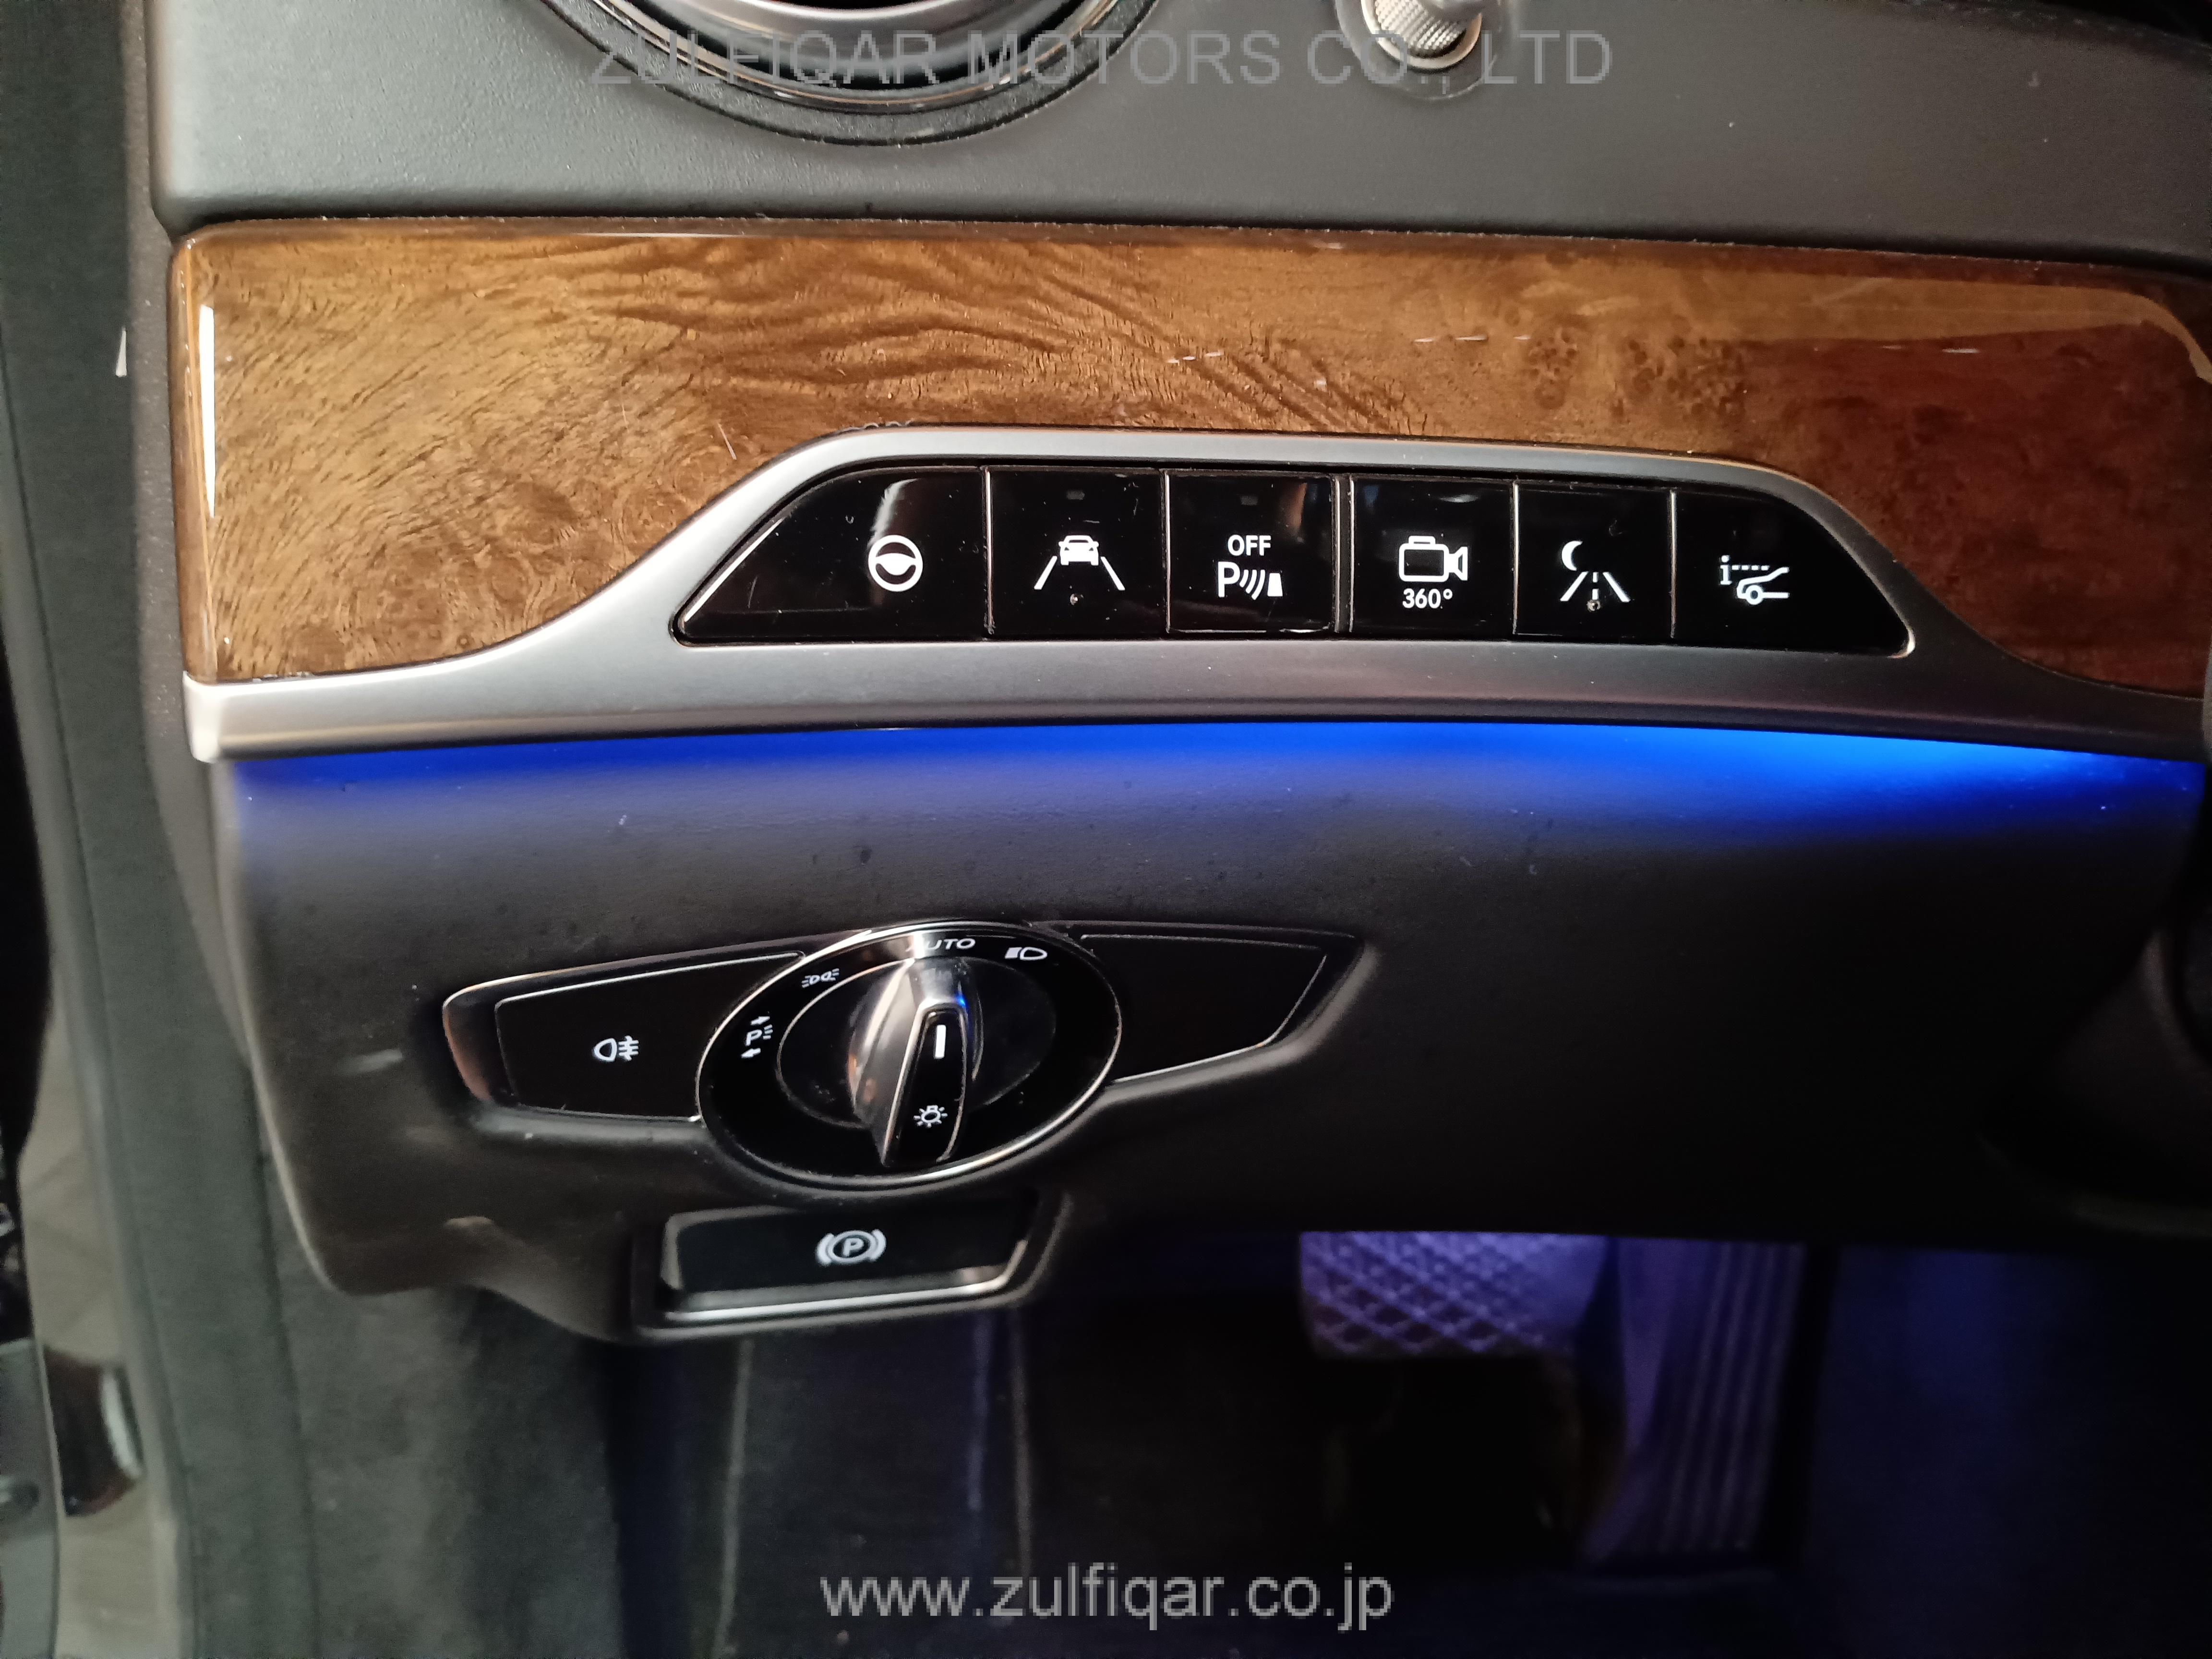 MERCEDES MAYBACH S CLASS 2015 Image 41